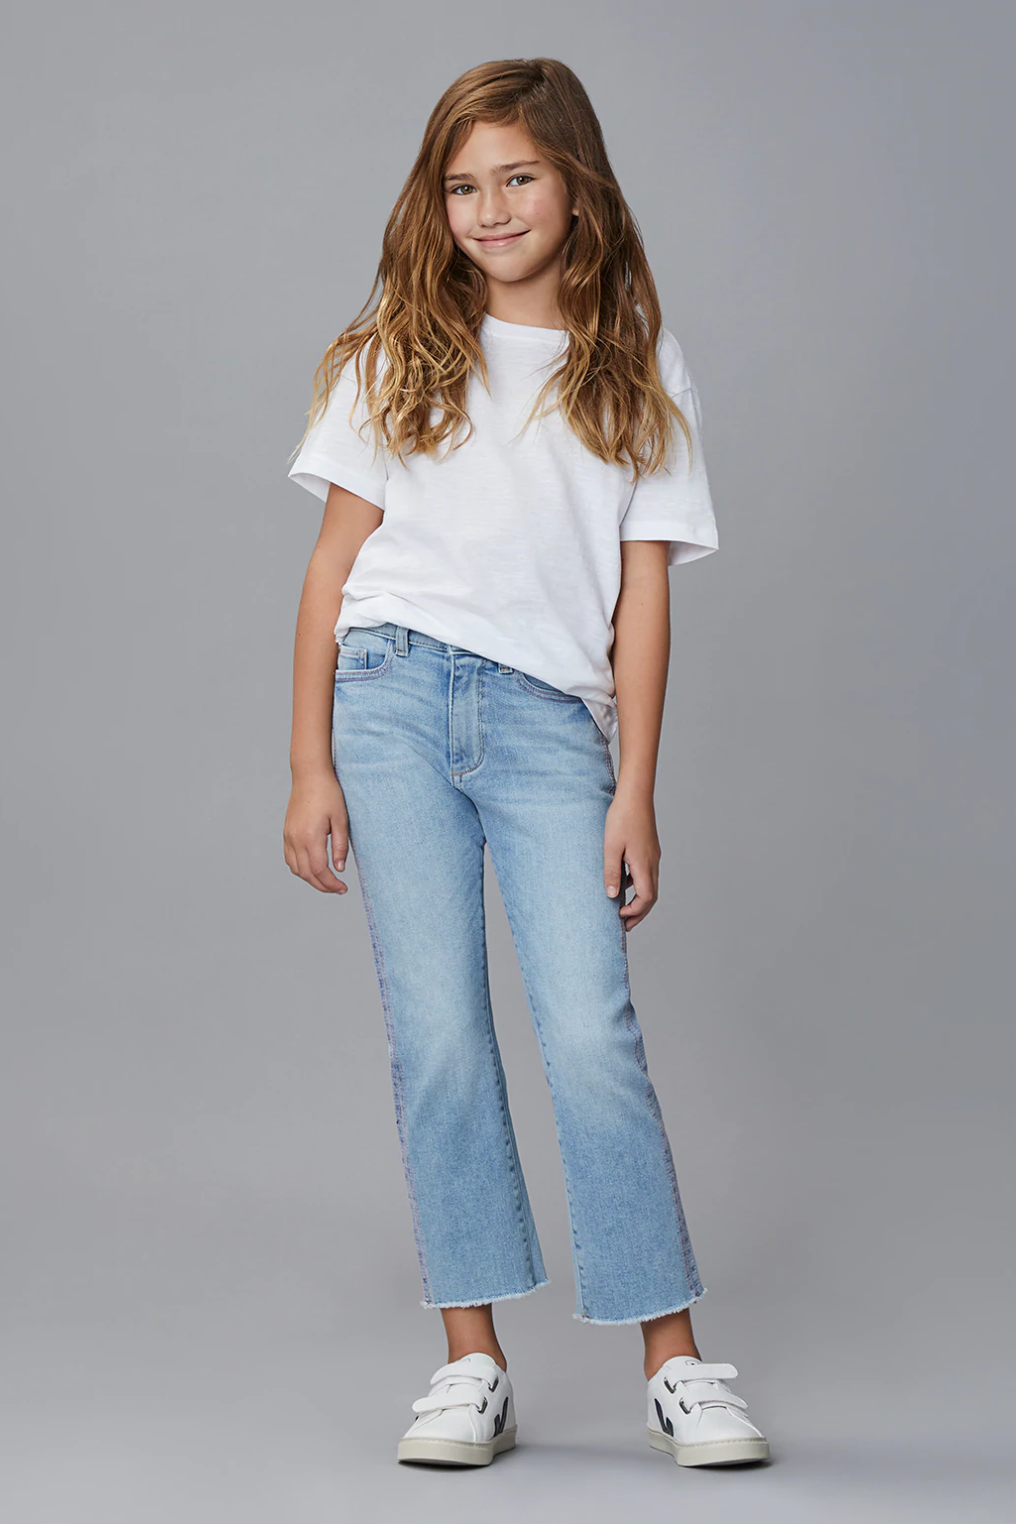 The Emie High Rise Straight Leg Jeans in Arctic by DL1961